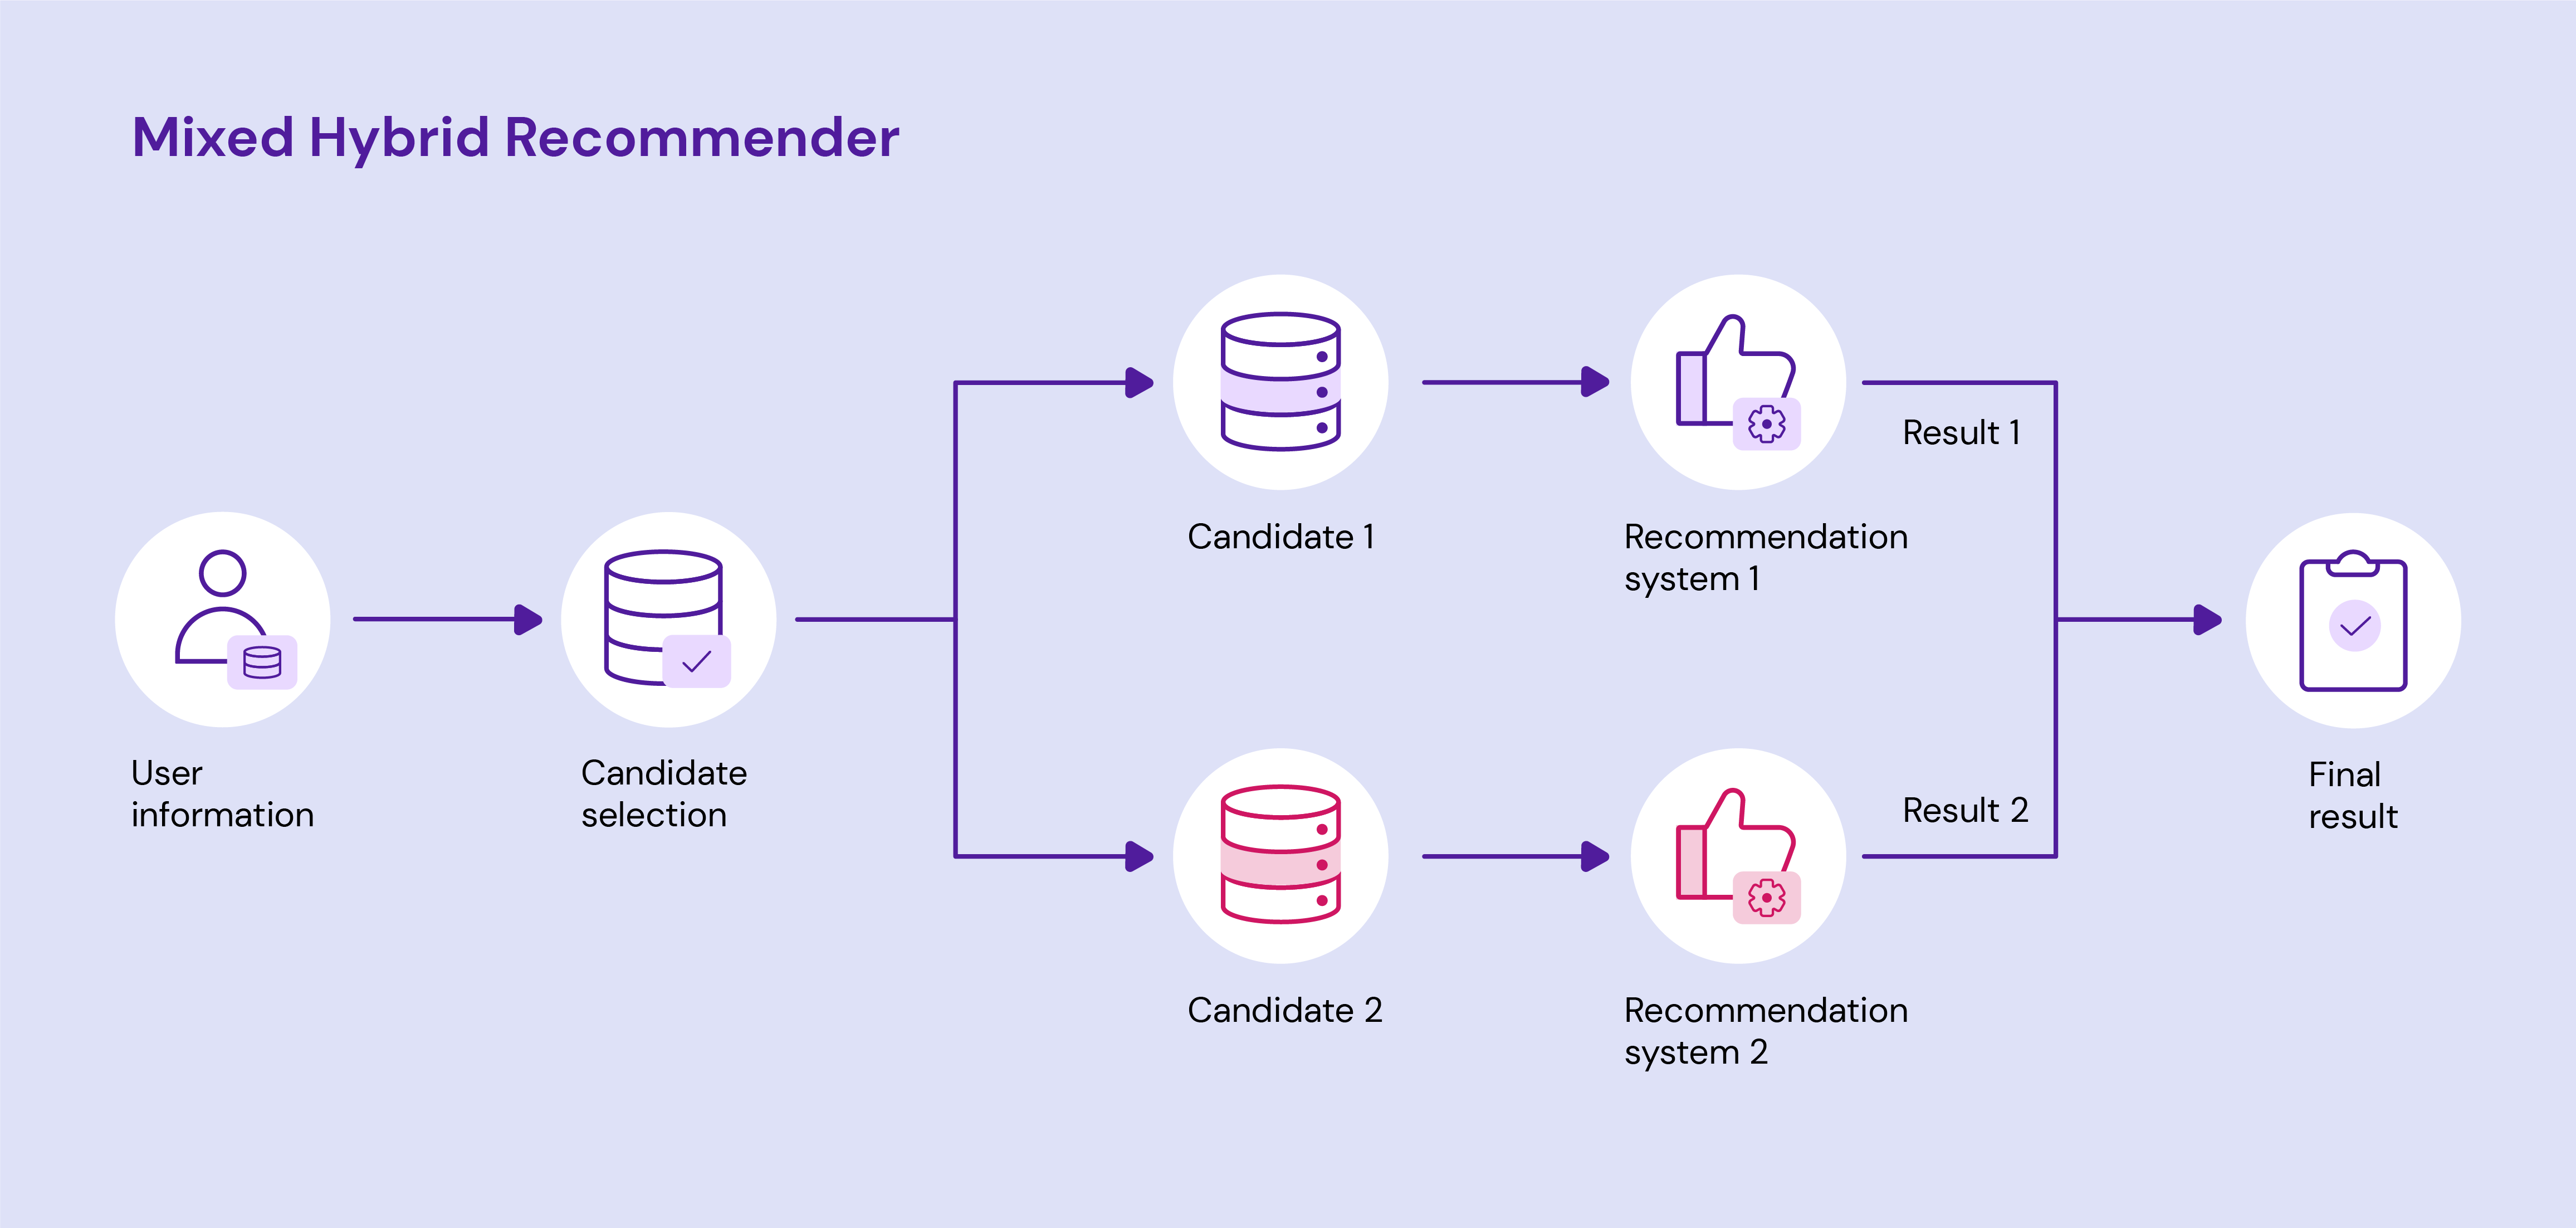 Mixed Hybrid Recommender